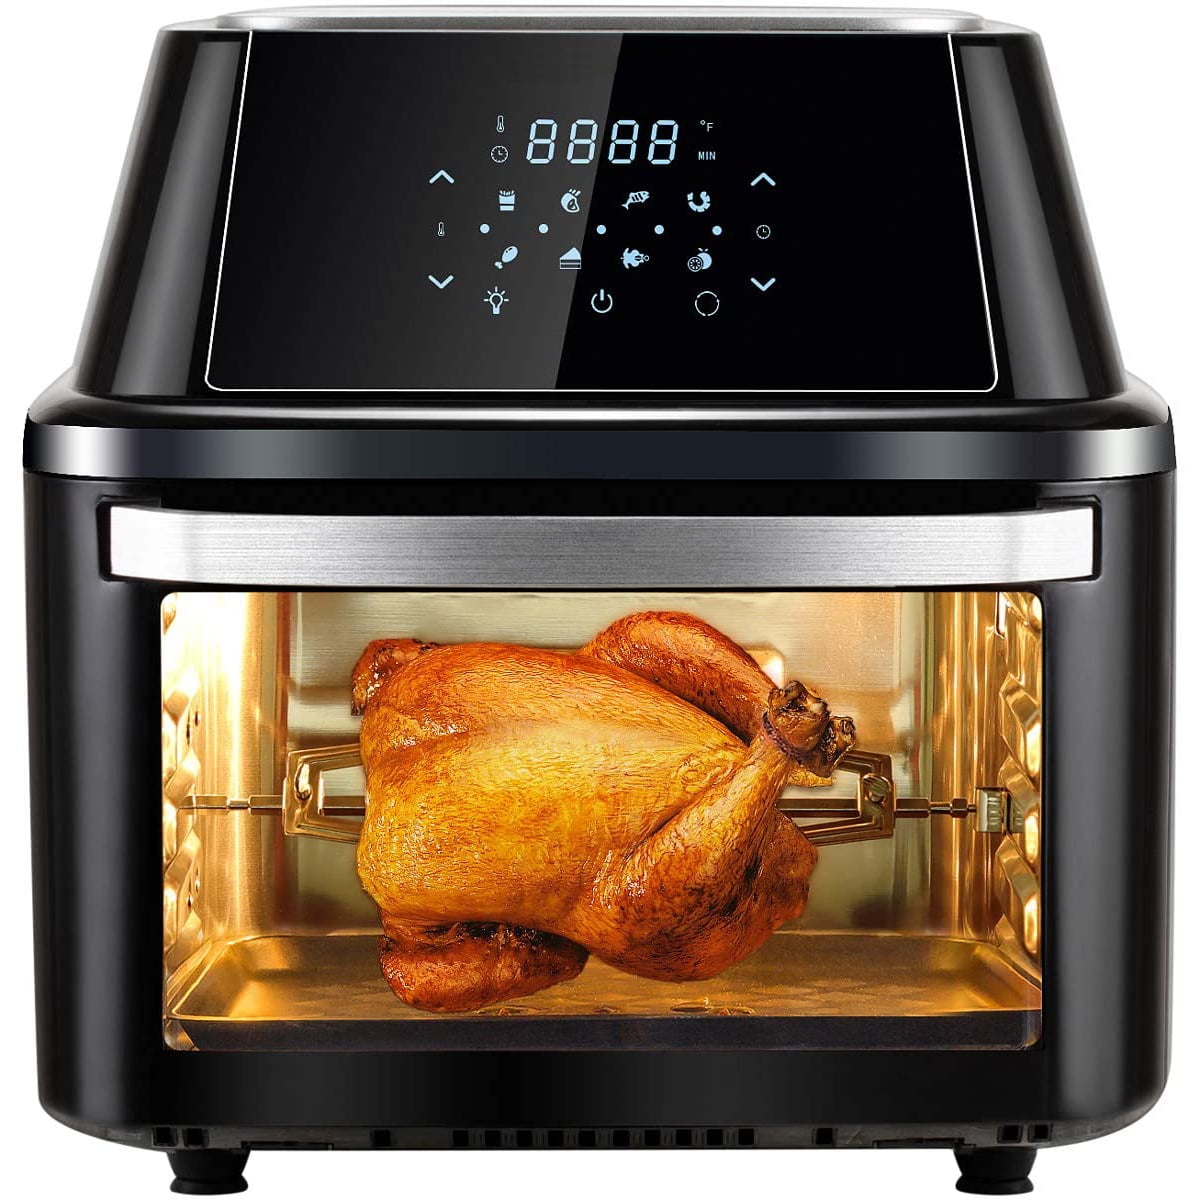 Eagle 17 Qt 1800W 8-in-1 Family Size Air Fryer Countertop Oven, Rotisserie,...